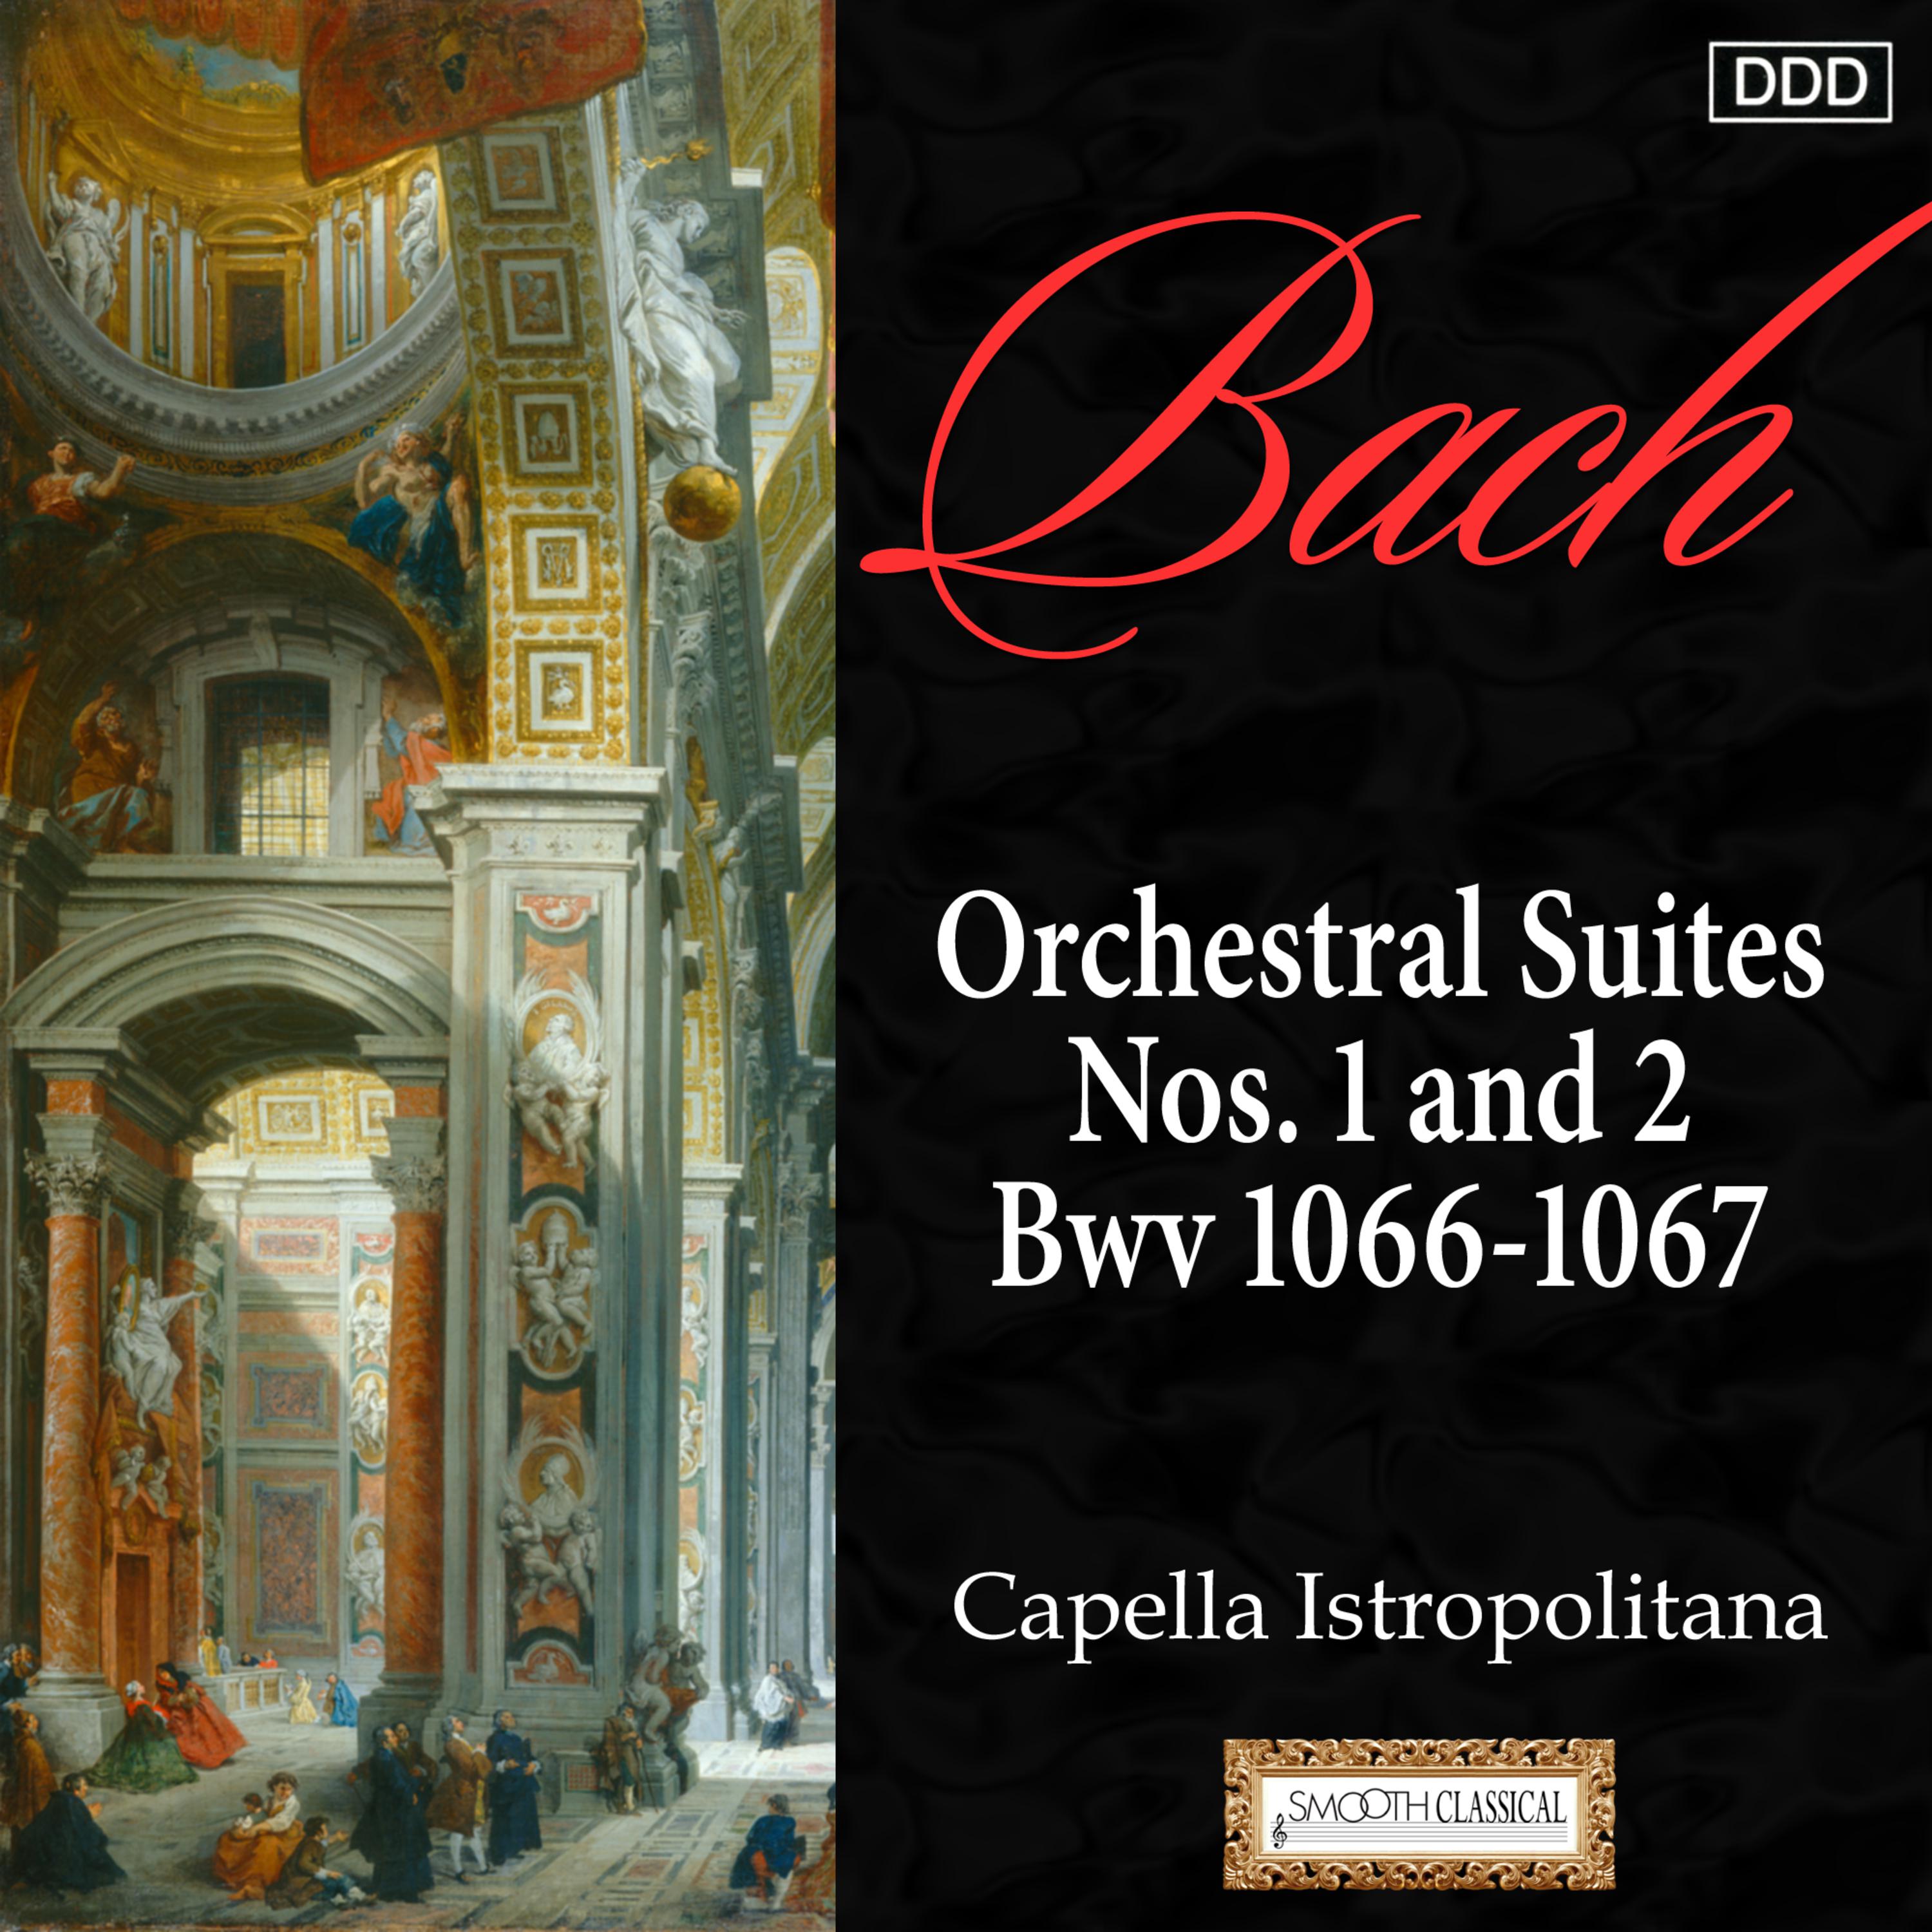 Orchestral Suite No. 2 in B Minor, BWV 1067: IV. Bourree I and II